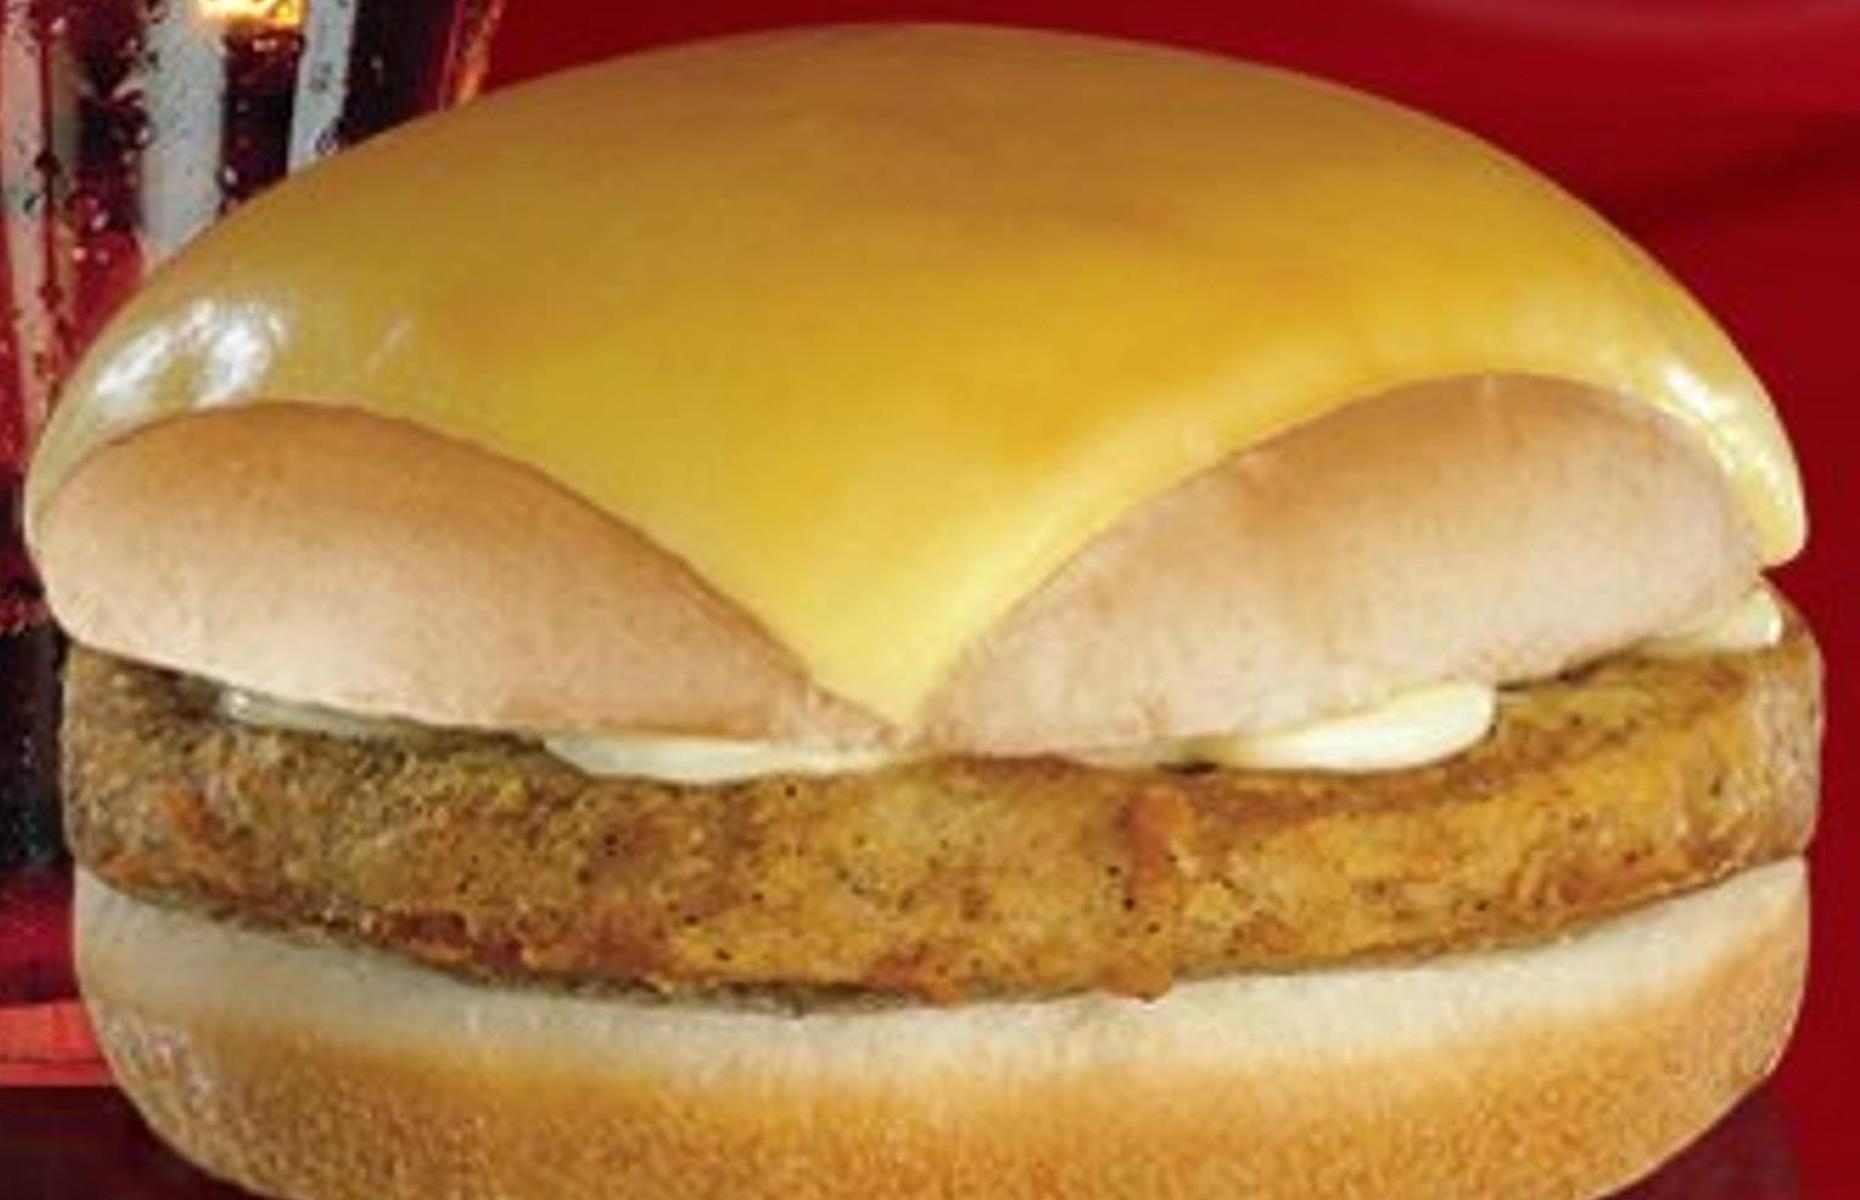 <p>Who says the cheese has to go inside the burger? KFC Philippines certainly didn't think so when it introduced this game-changing dish. It features an otherwise regular Original Recipe chicken sandwich, with garlic Parmesan dressing, but with a slice of melted American-style cheese on top of the bun. Despite some criticism of the topsy-turvy creation, it was said to sell well when it was launched in 2012.</p>